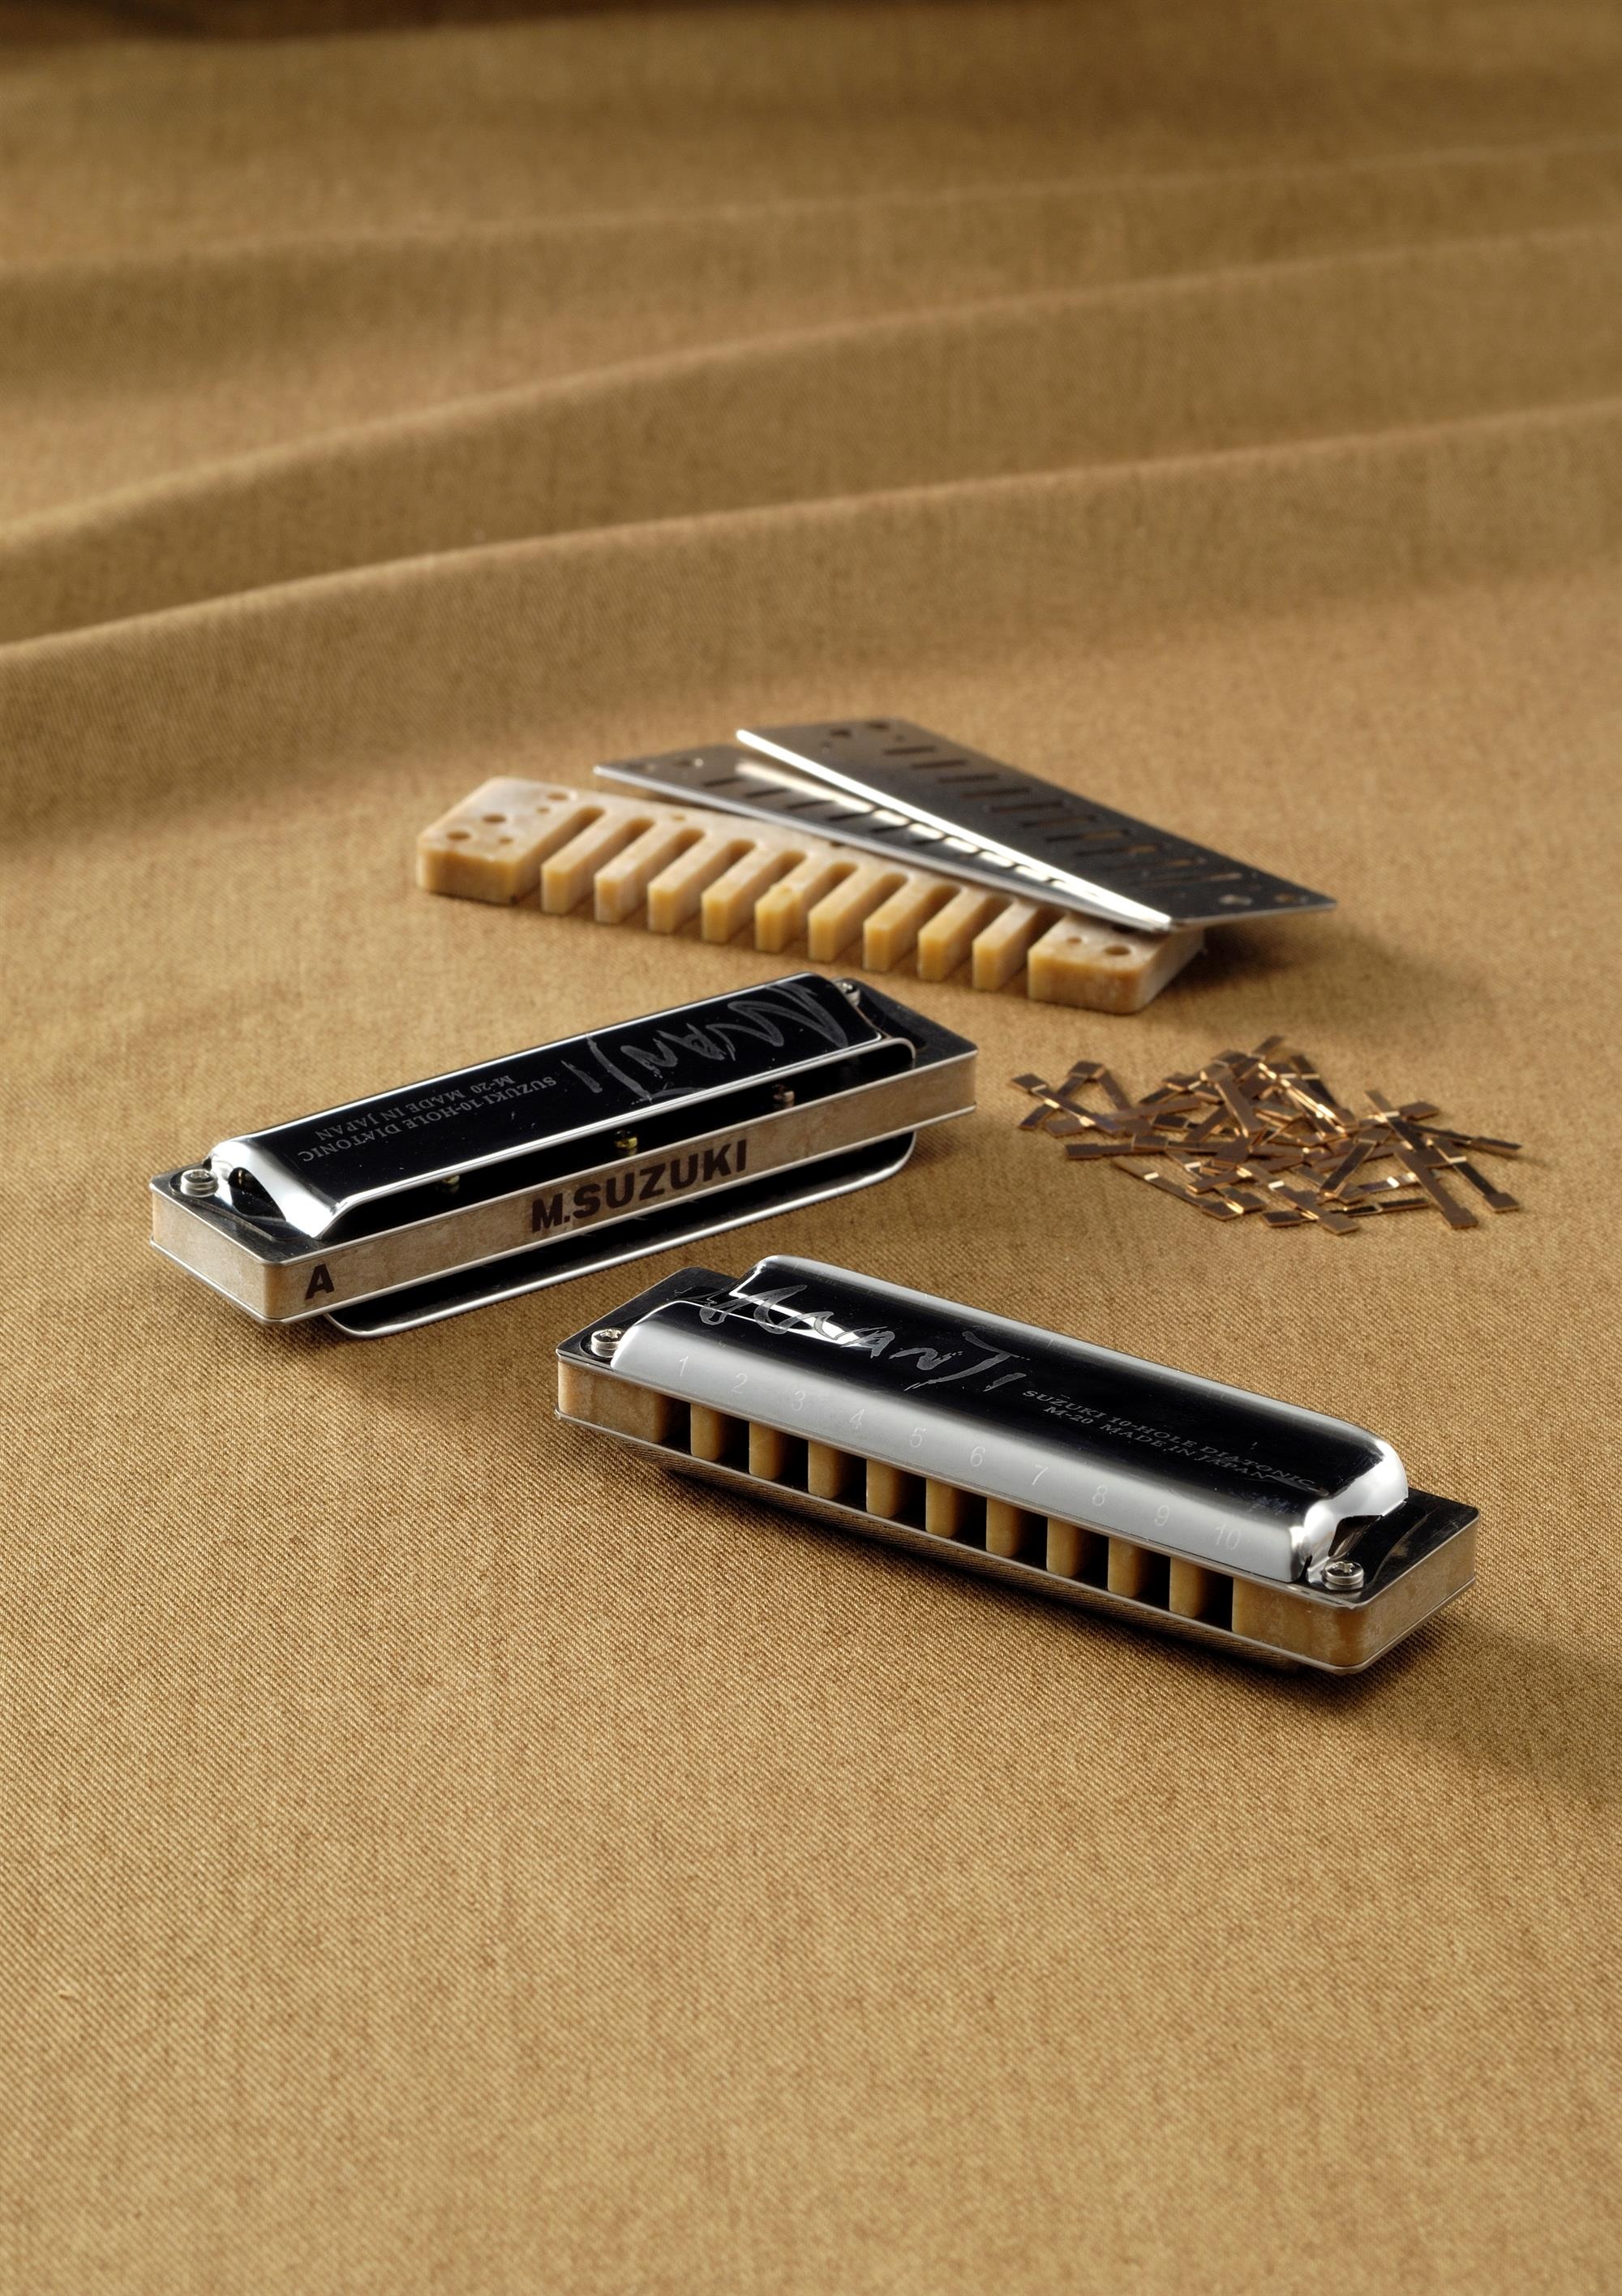 Harmonica: The Comb, Reed Plates, Cover Plates, Mouth Organ. 2000x2840 HD Wallpaper.